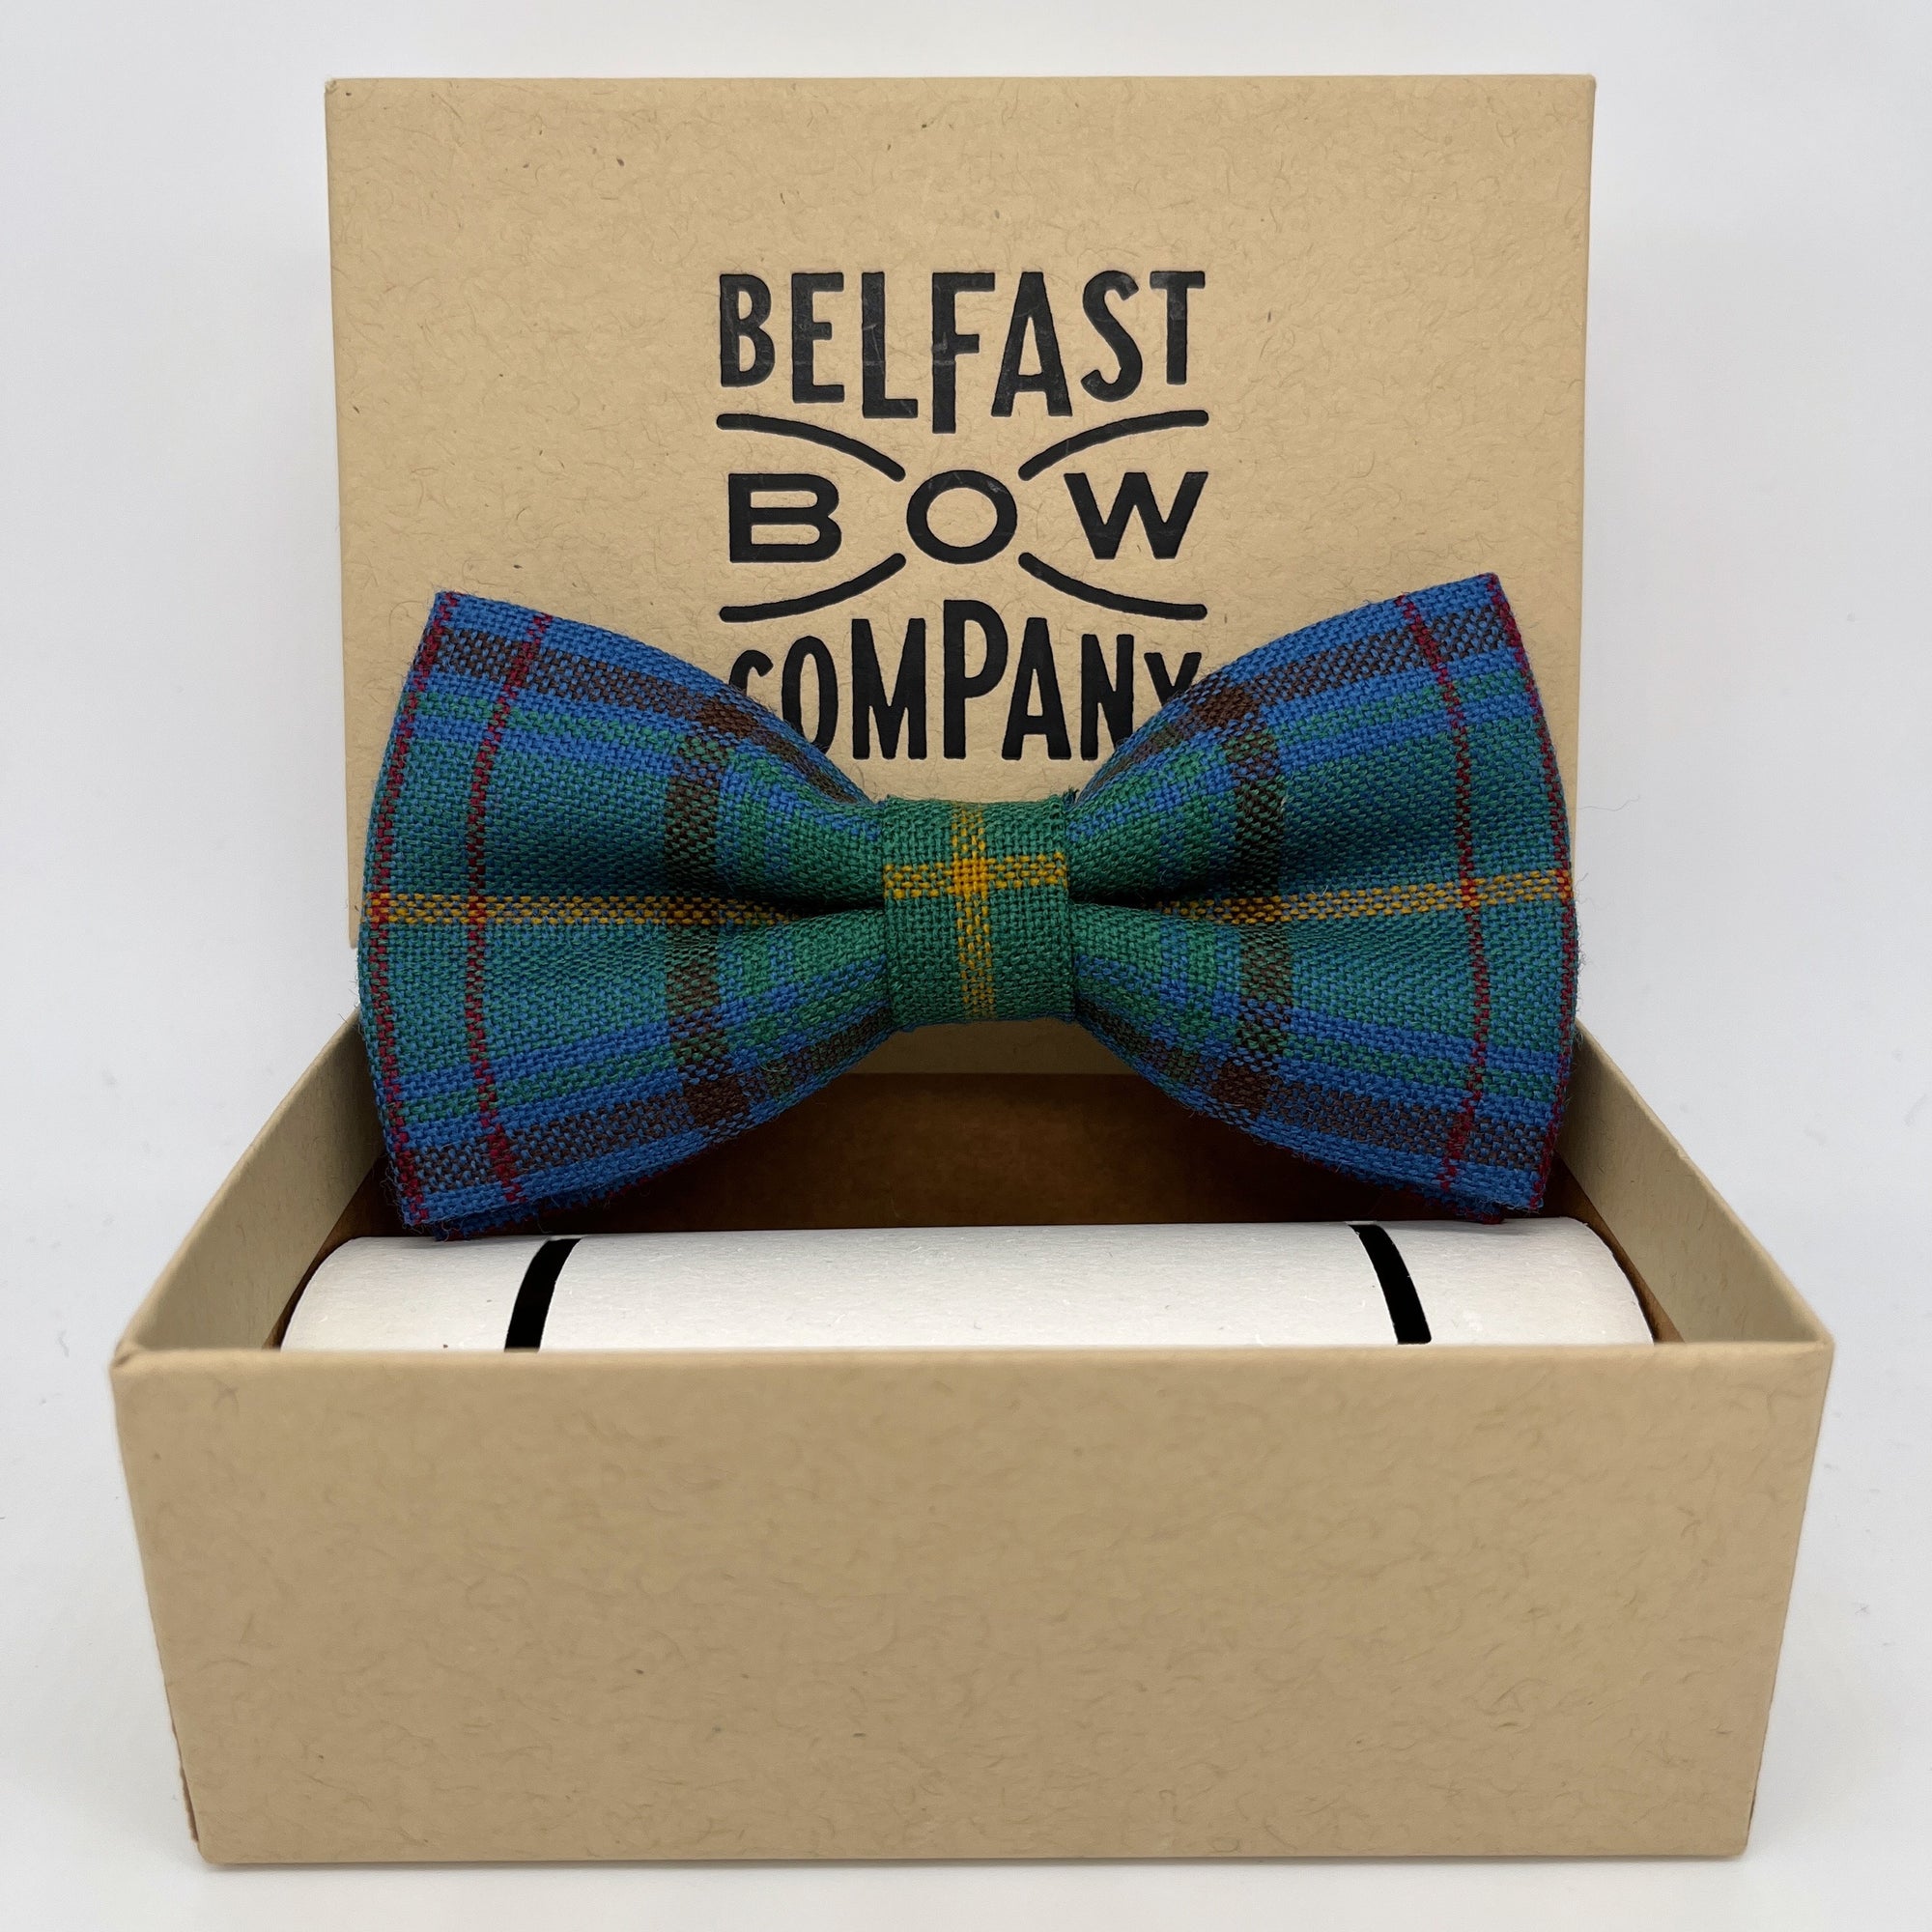 County Donegal Tartan Bow Tie by the Belfast Bow Company